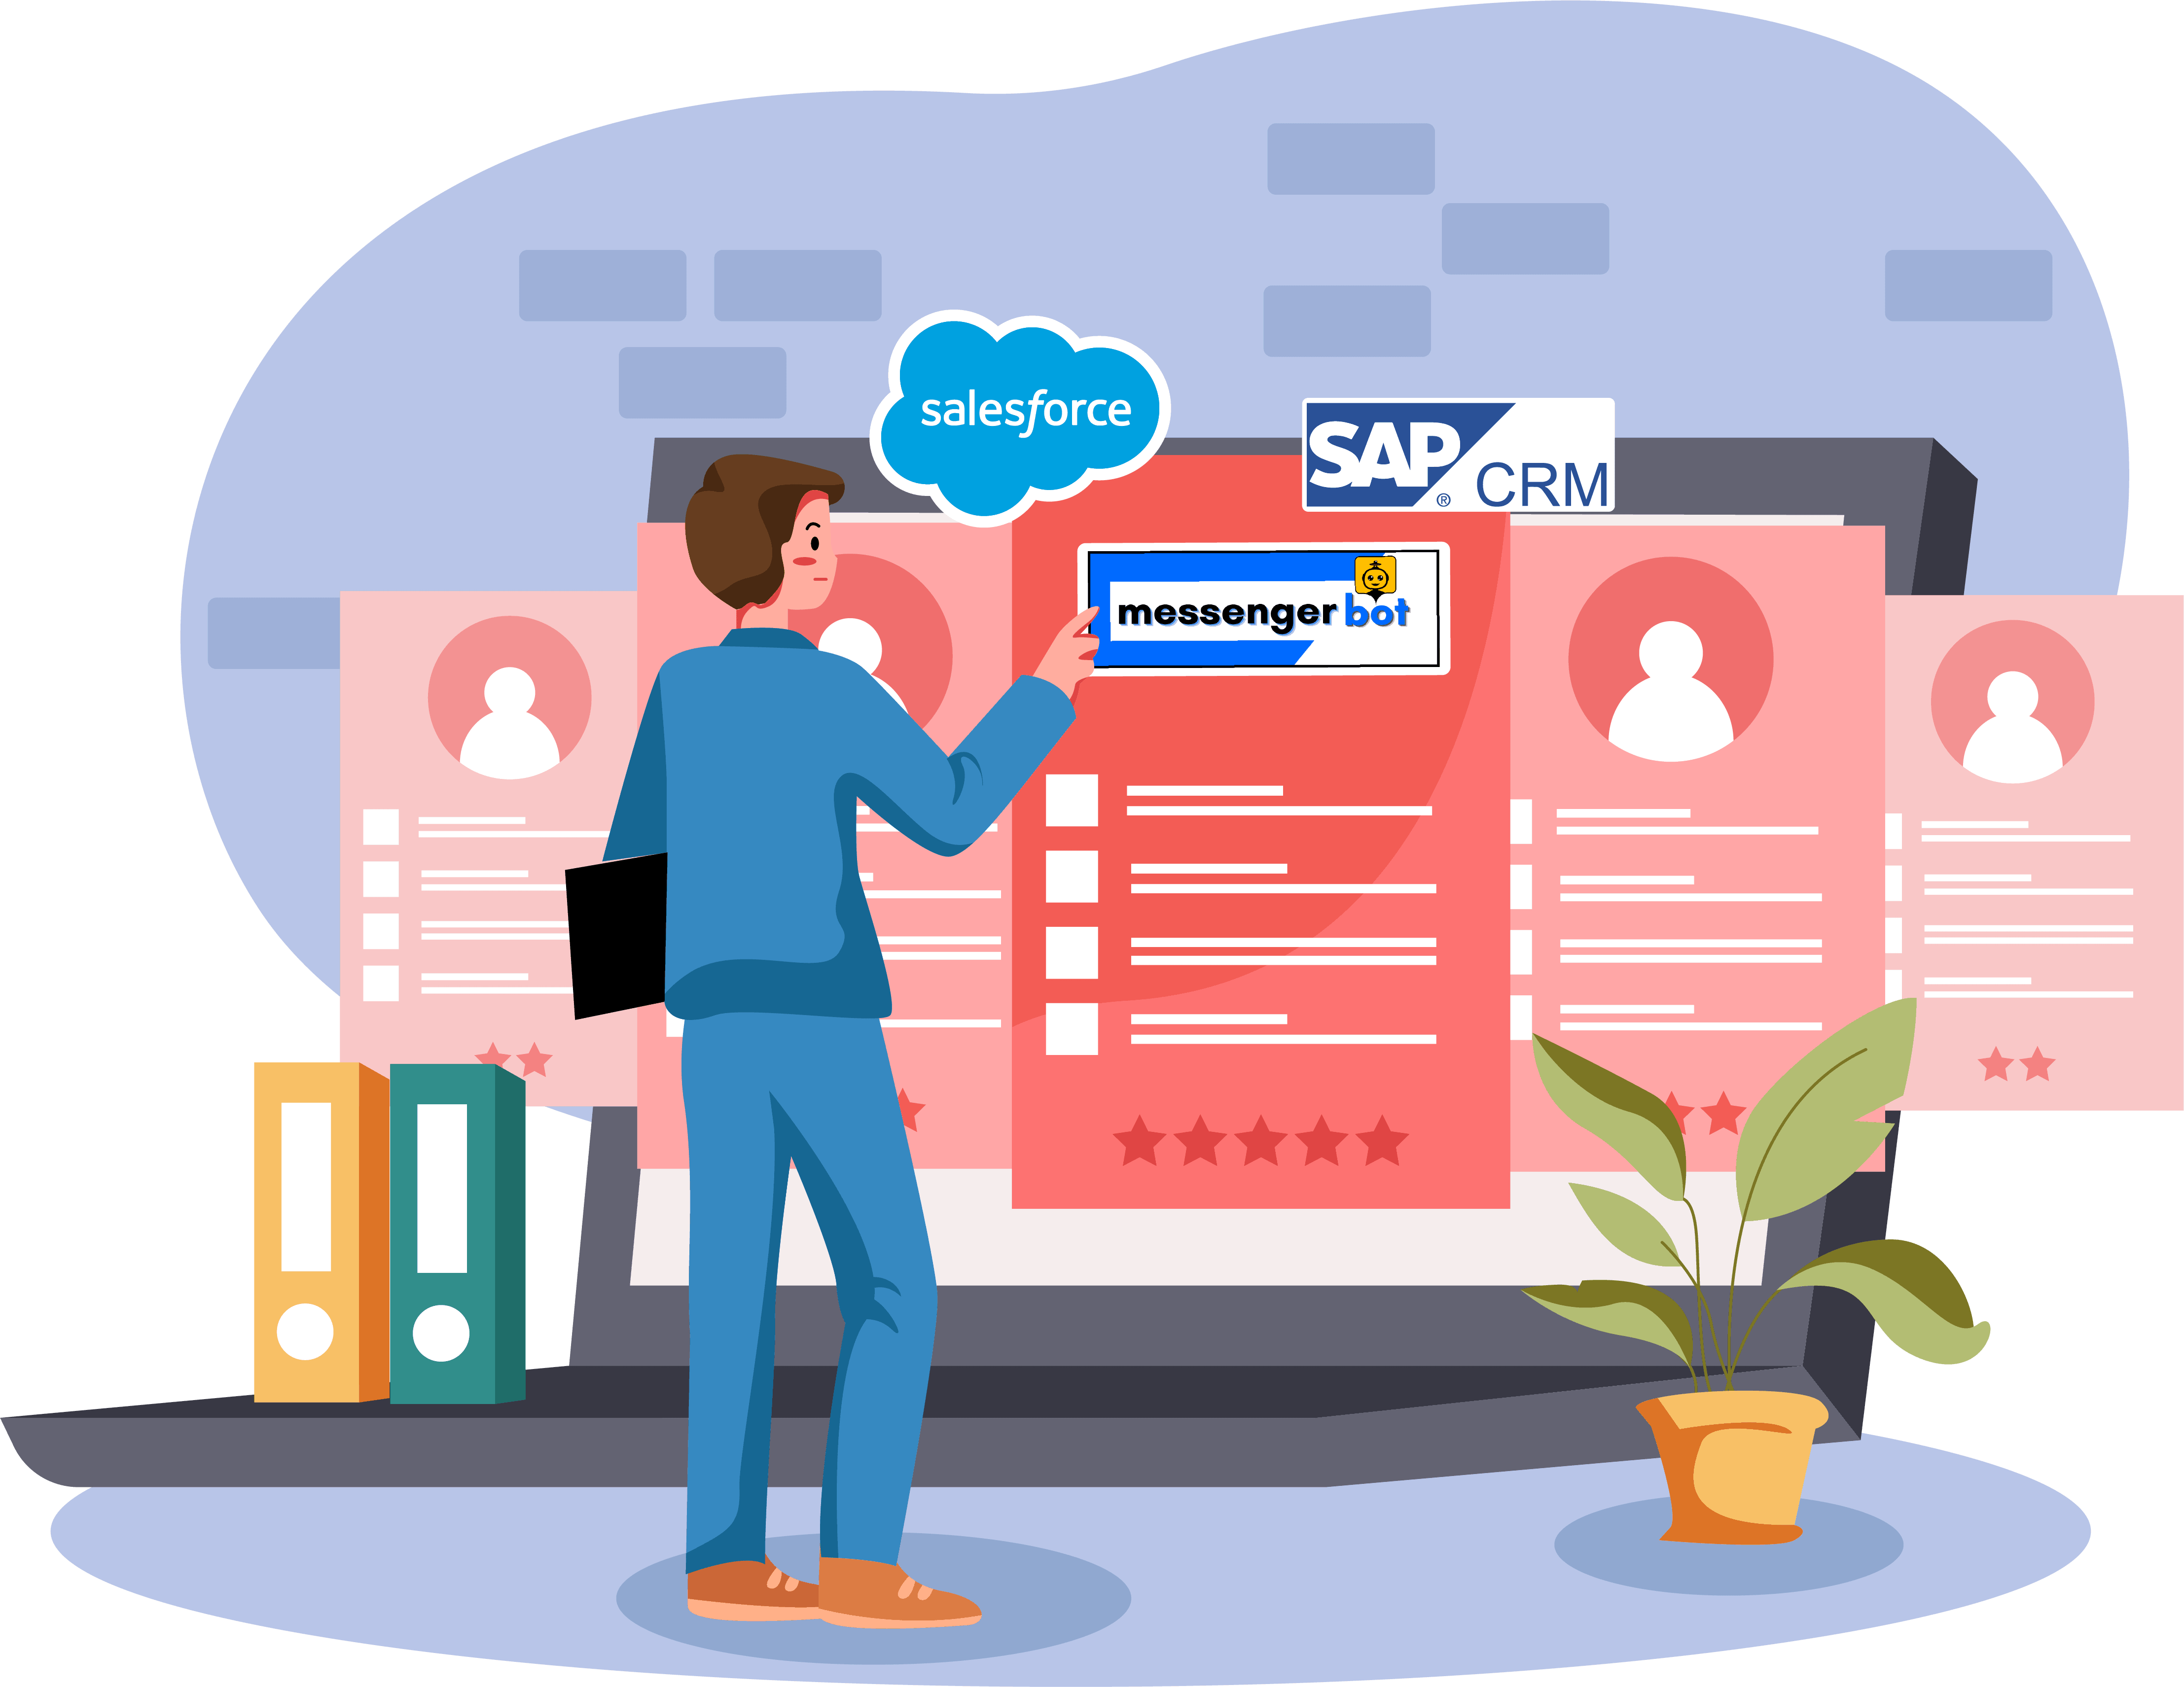 Sap vs Salesforce, Best CRM, Which is the better CRM, CRM software, CRM solution, CRM, CRM review and comparisons